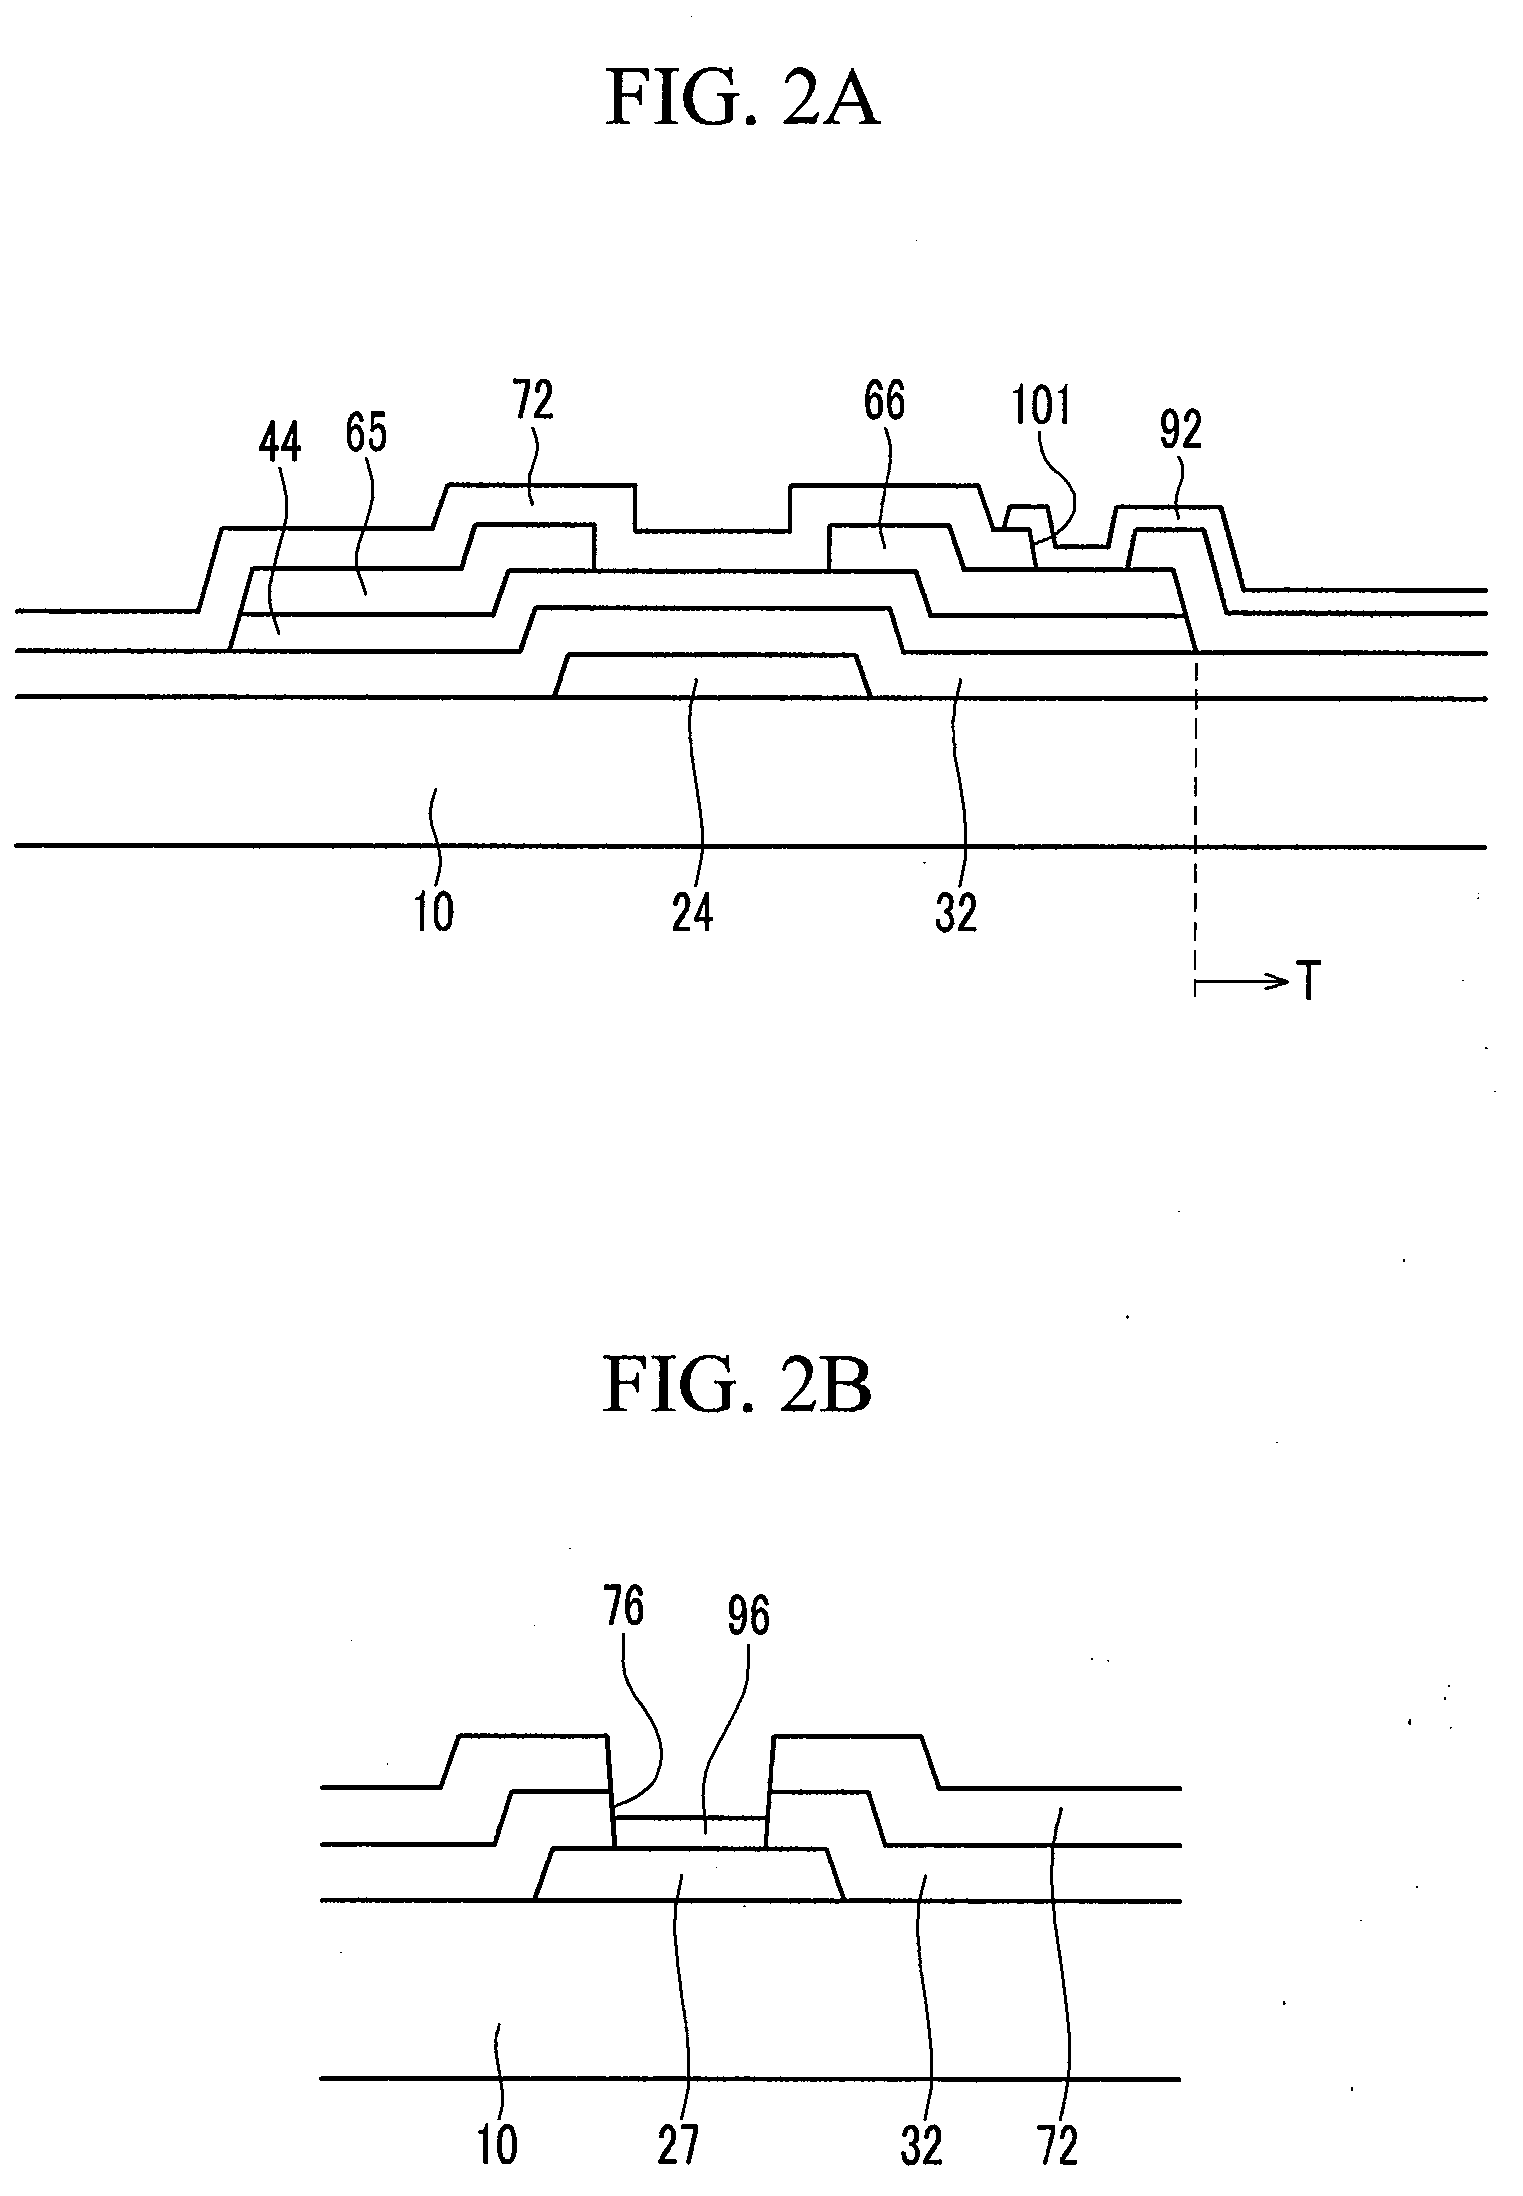 Thin film transistor array substrate and method of fabricating the same